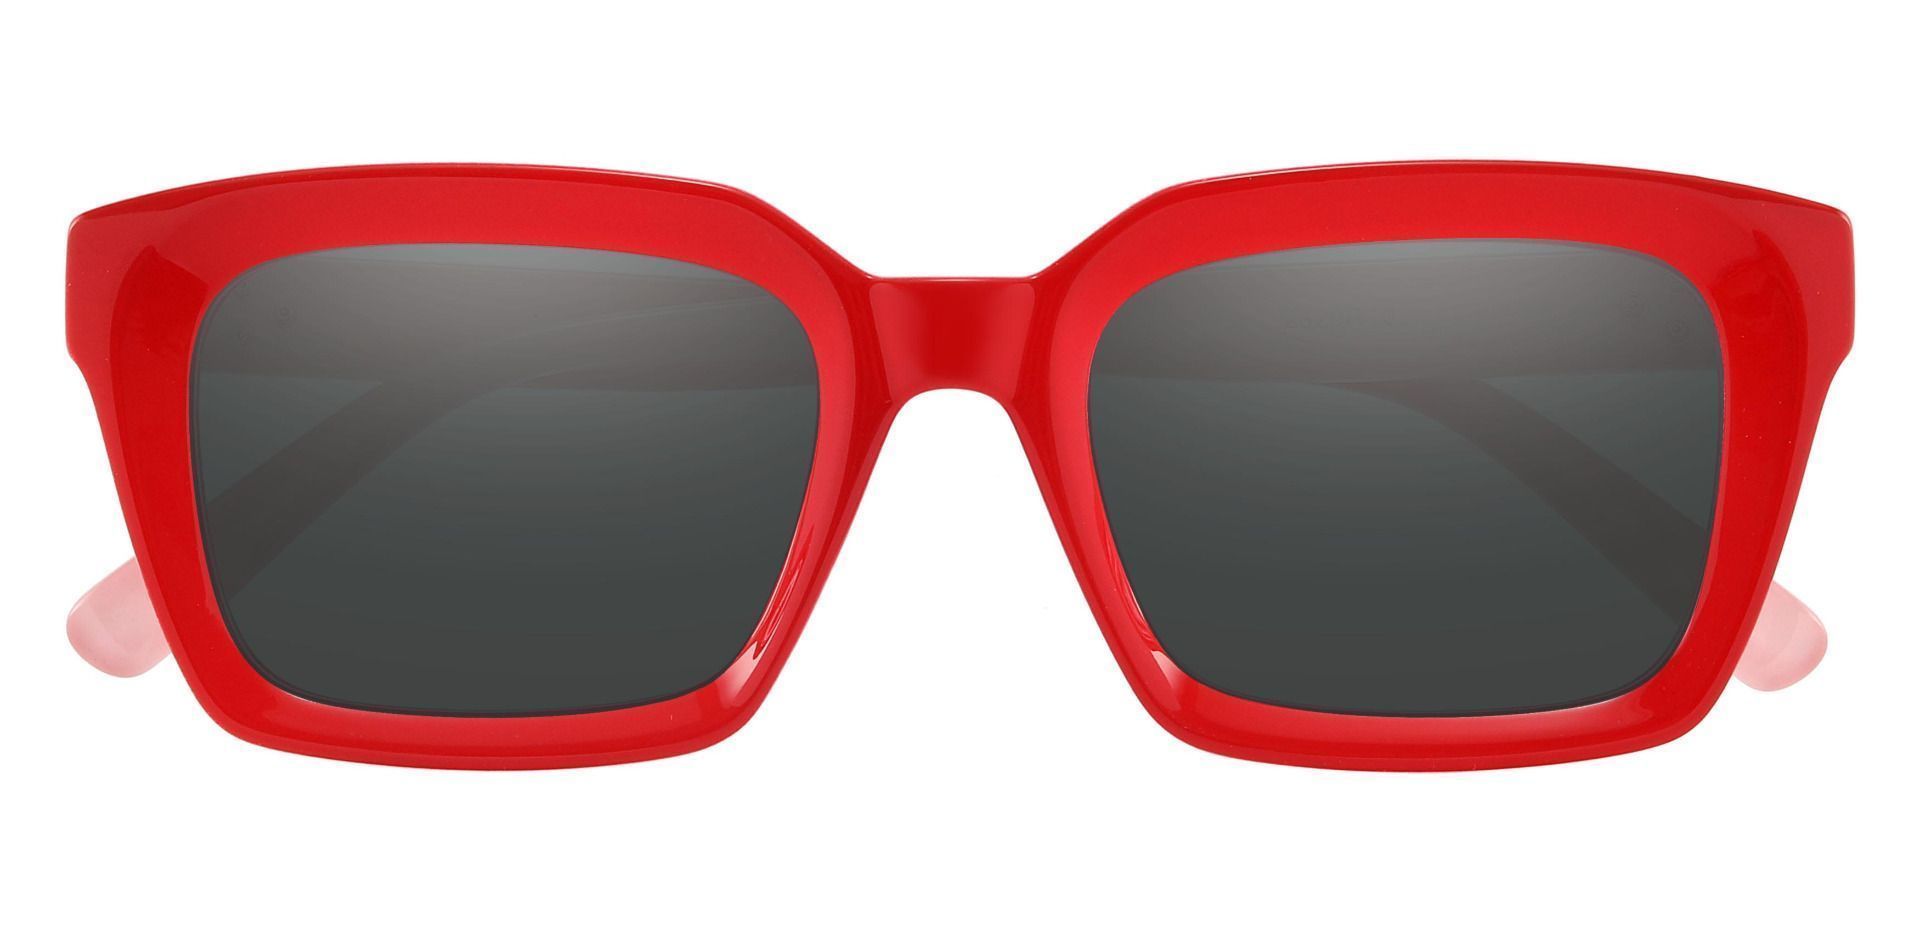 Unity Rectangle Prescription Sunglasses - Red Frame With Gray Lenses